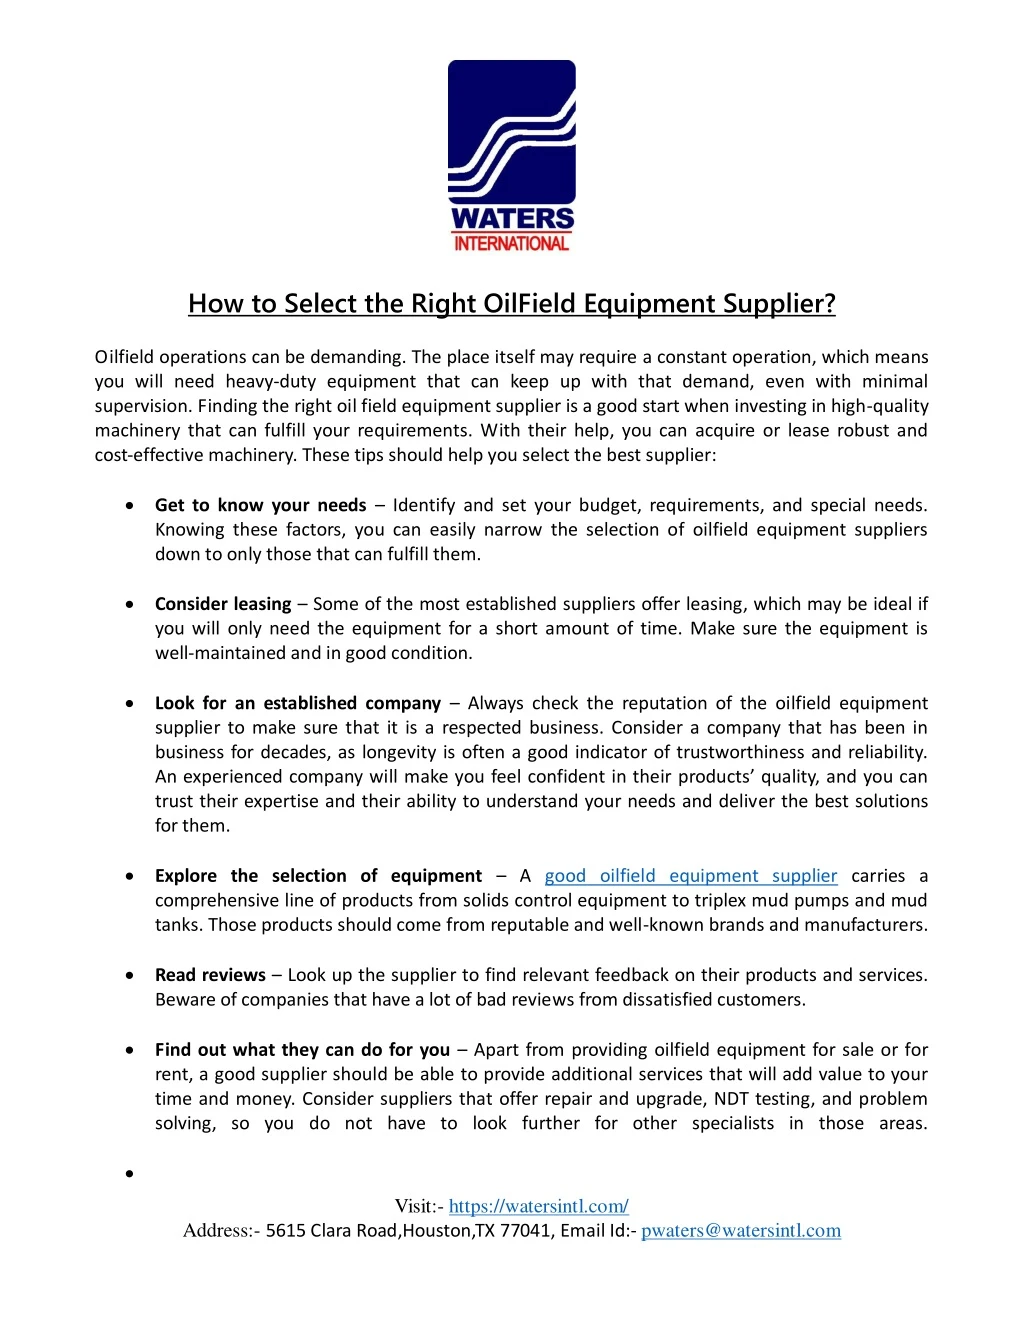 how to select the right oilfield equipment